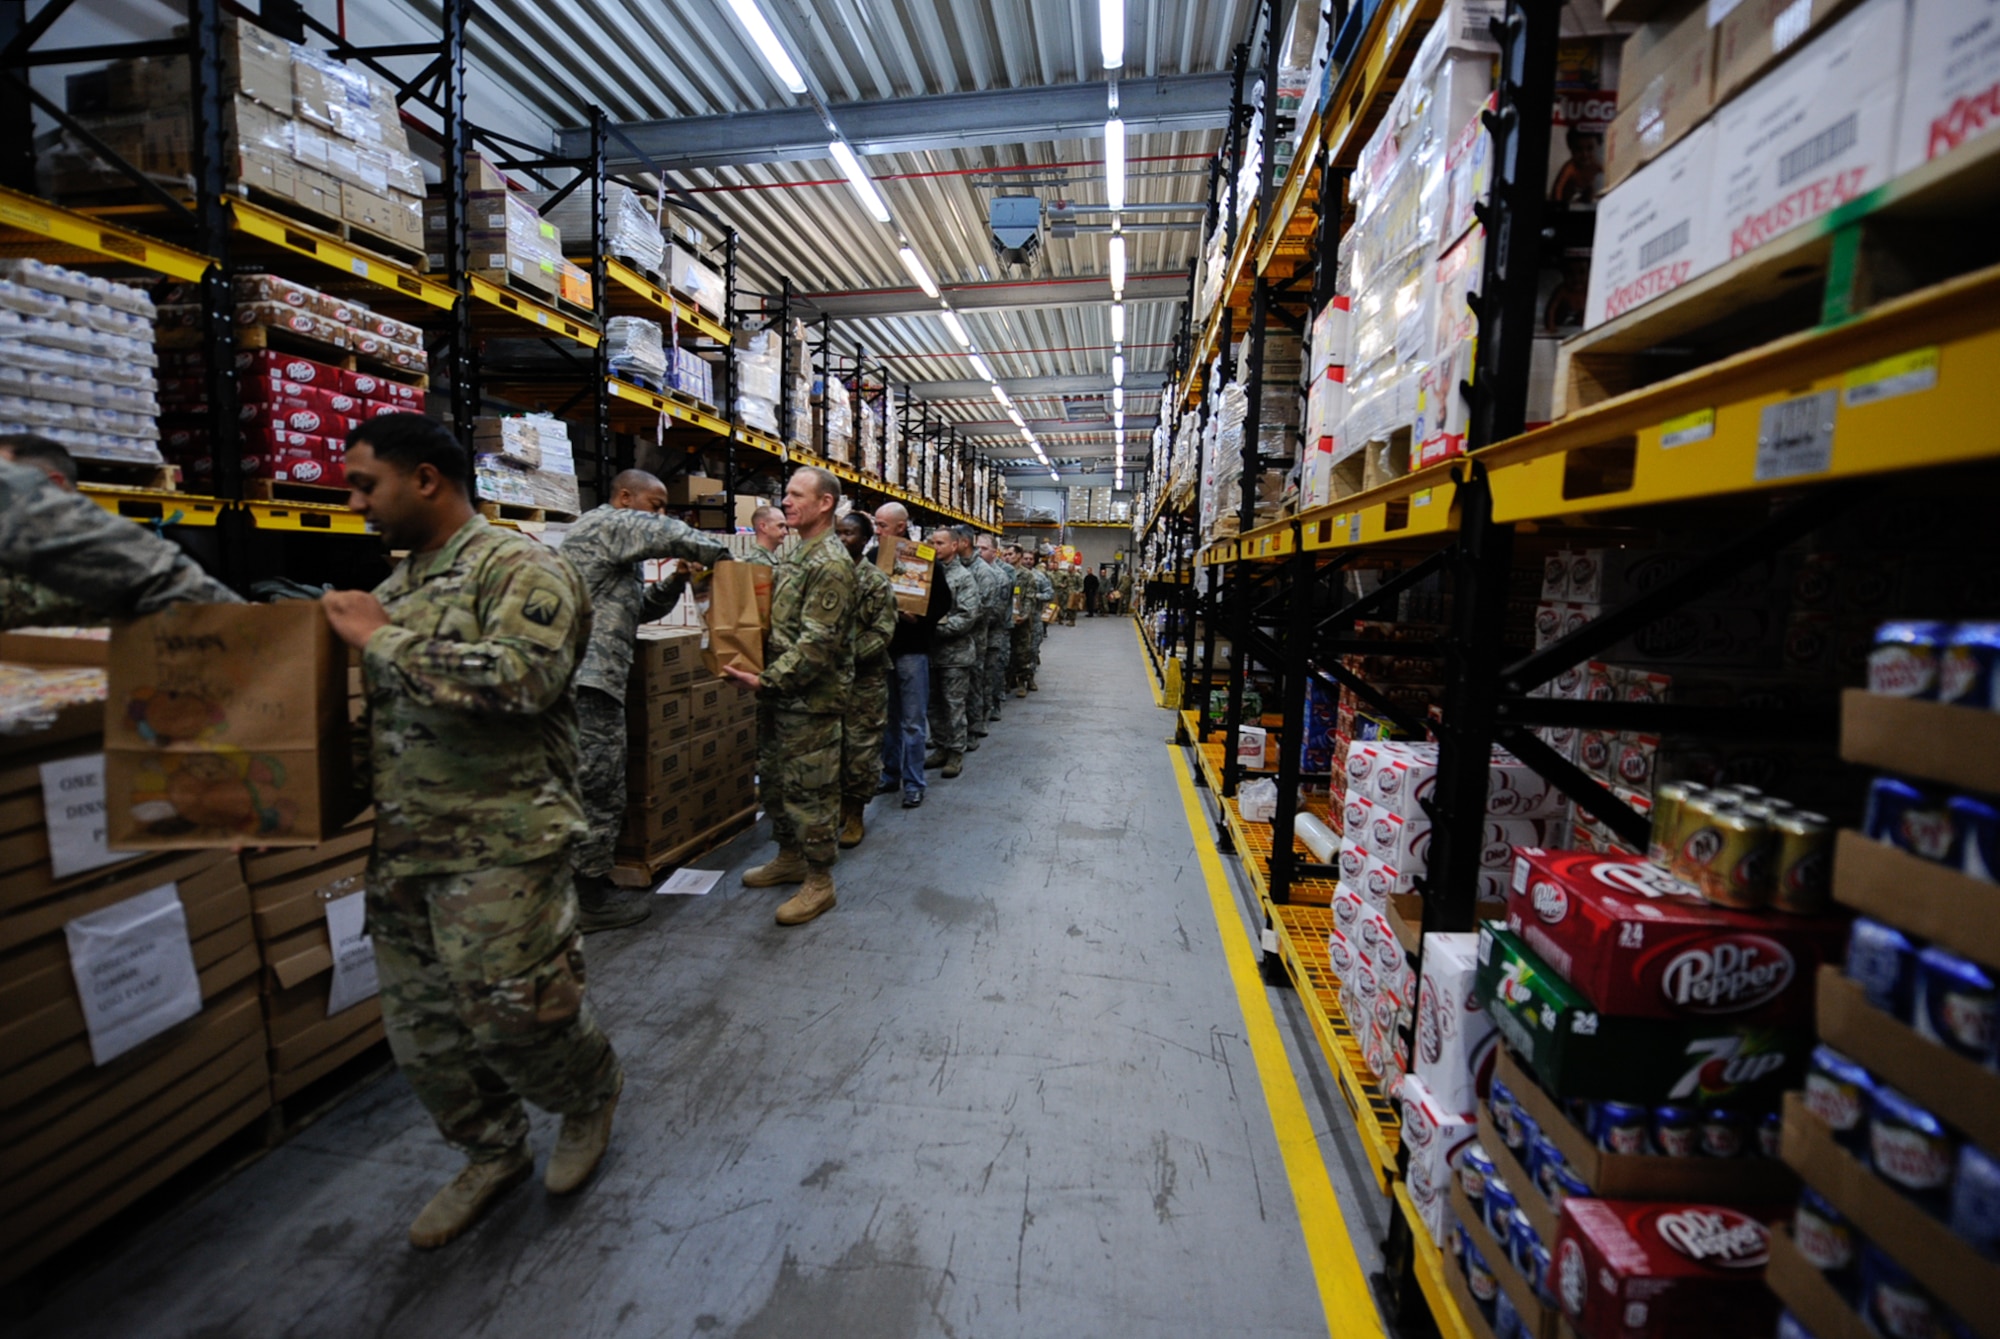 Airmen and Soldiers line up to fill bags with food and supplies at the Thanks for Thanksgiving event at Vogelweh Air Base. Germany, Nov. 19, 2016. Kaiserslautern Military Community leaders banded together to support junior enlisted service members by providing them with all the fixings for a traditional Thanksgiving meal (U.S. Air Force photo by Airman 1st Class Savannah L. Waters)